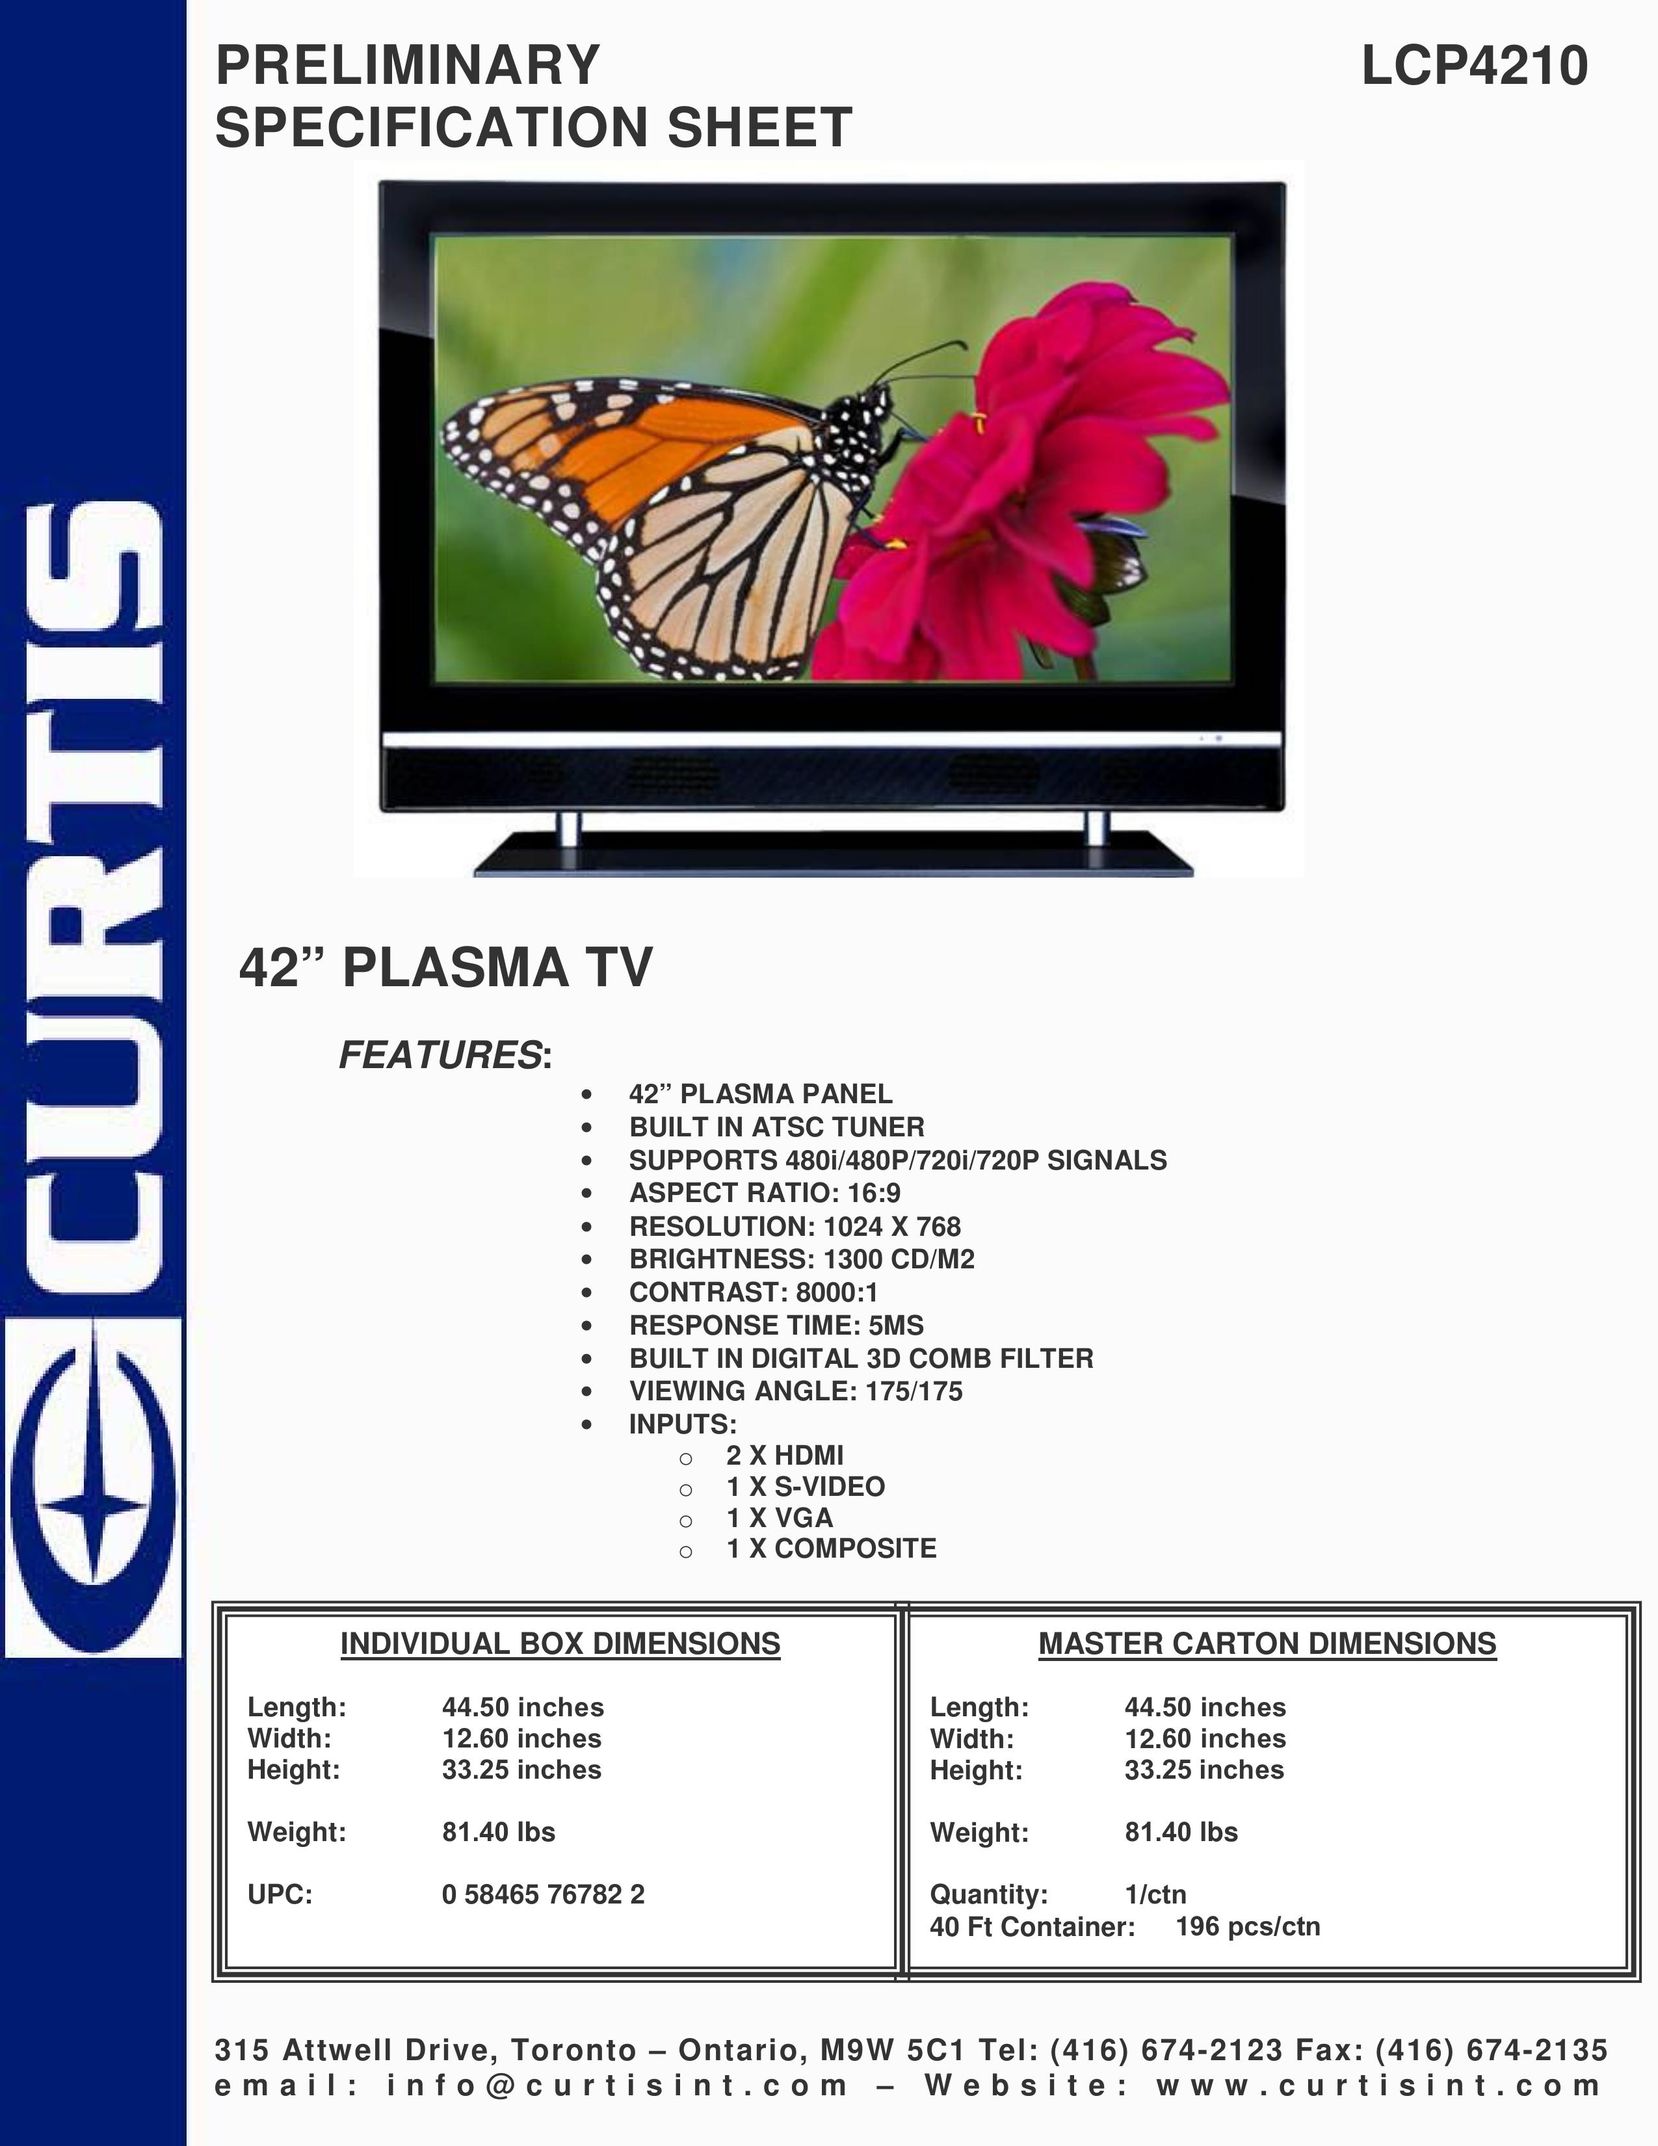 Curtis LCP4210 Flat Panel Television User Manual